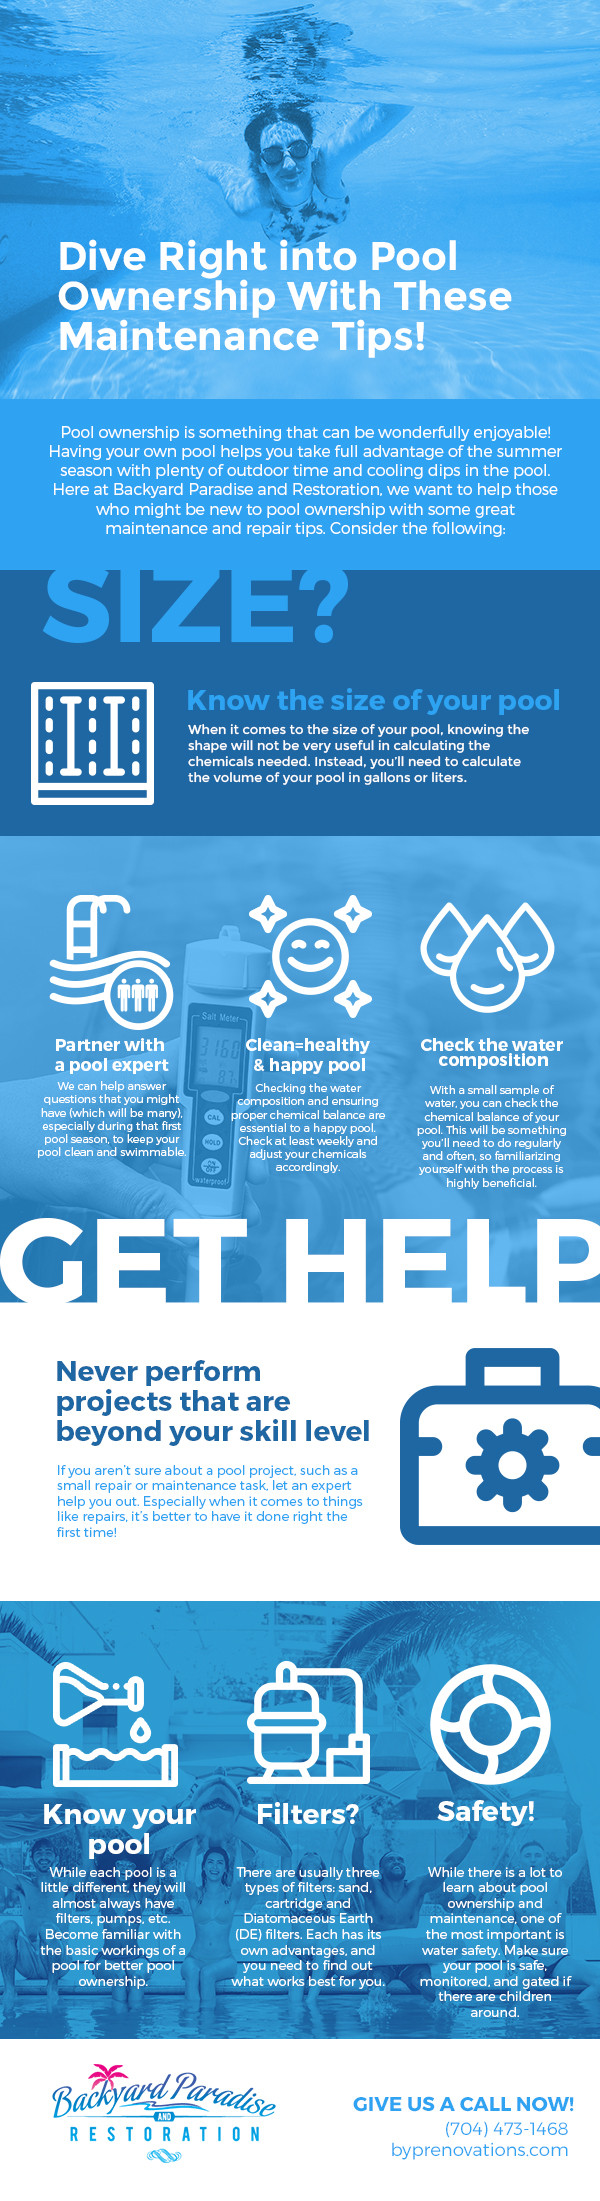 Dive Right into Pool Ownership With These Maintenance Tips! [infographic]